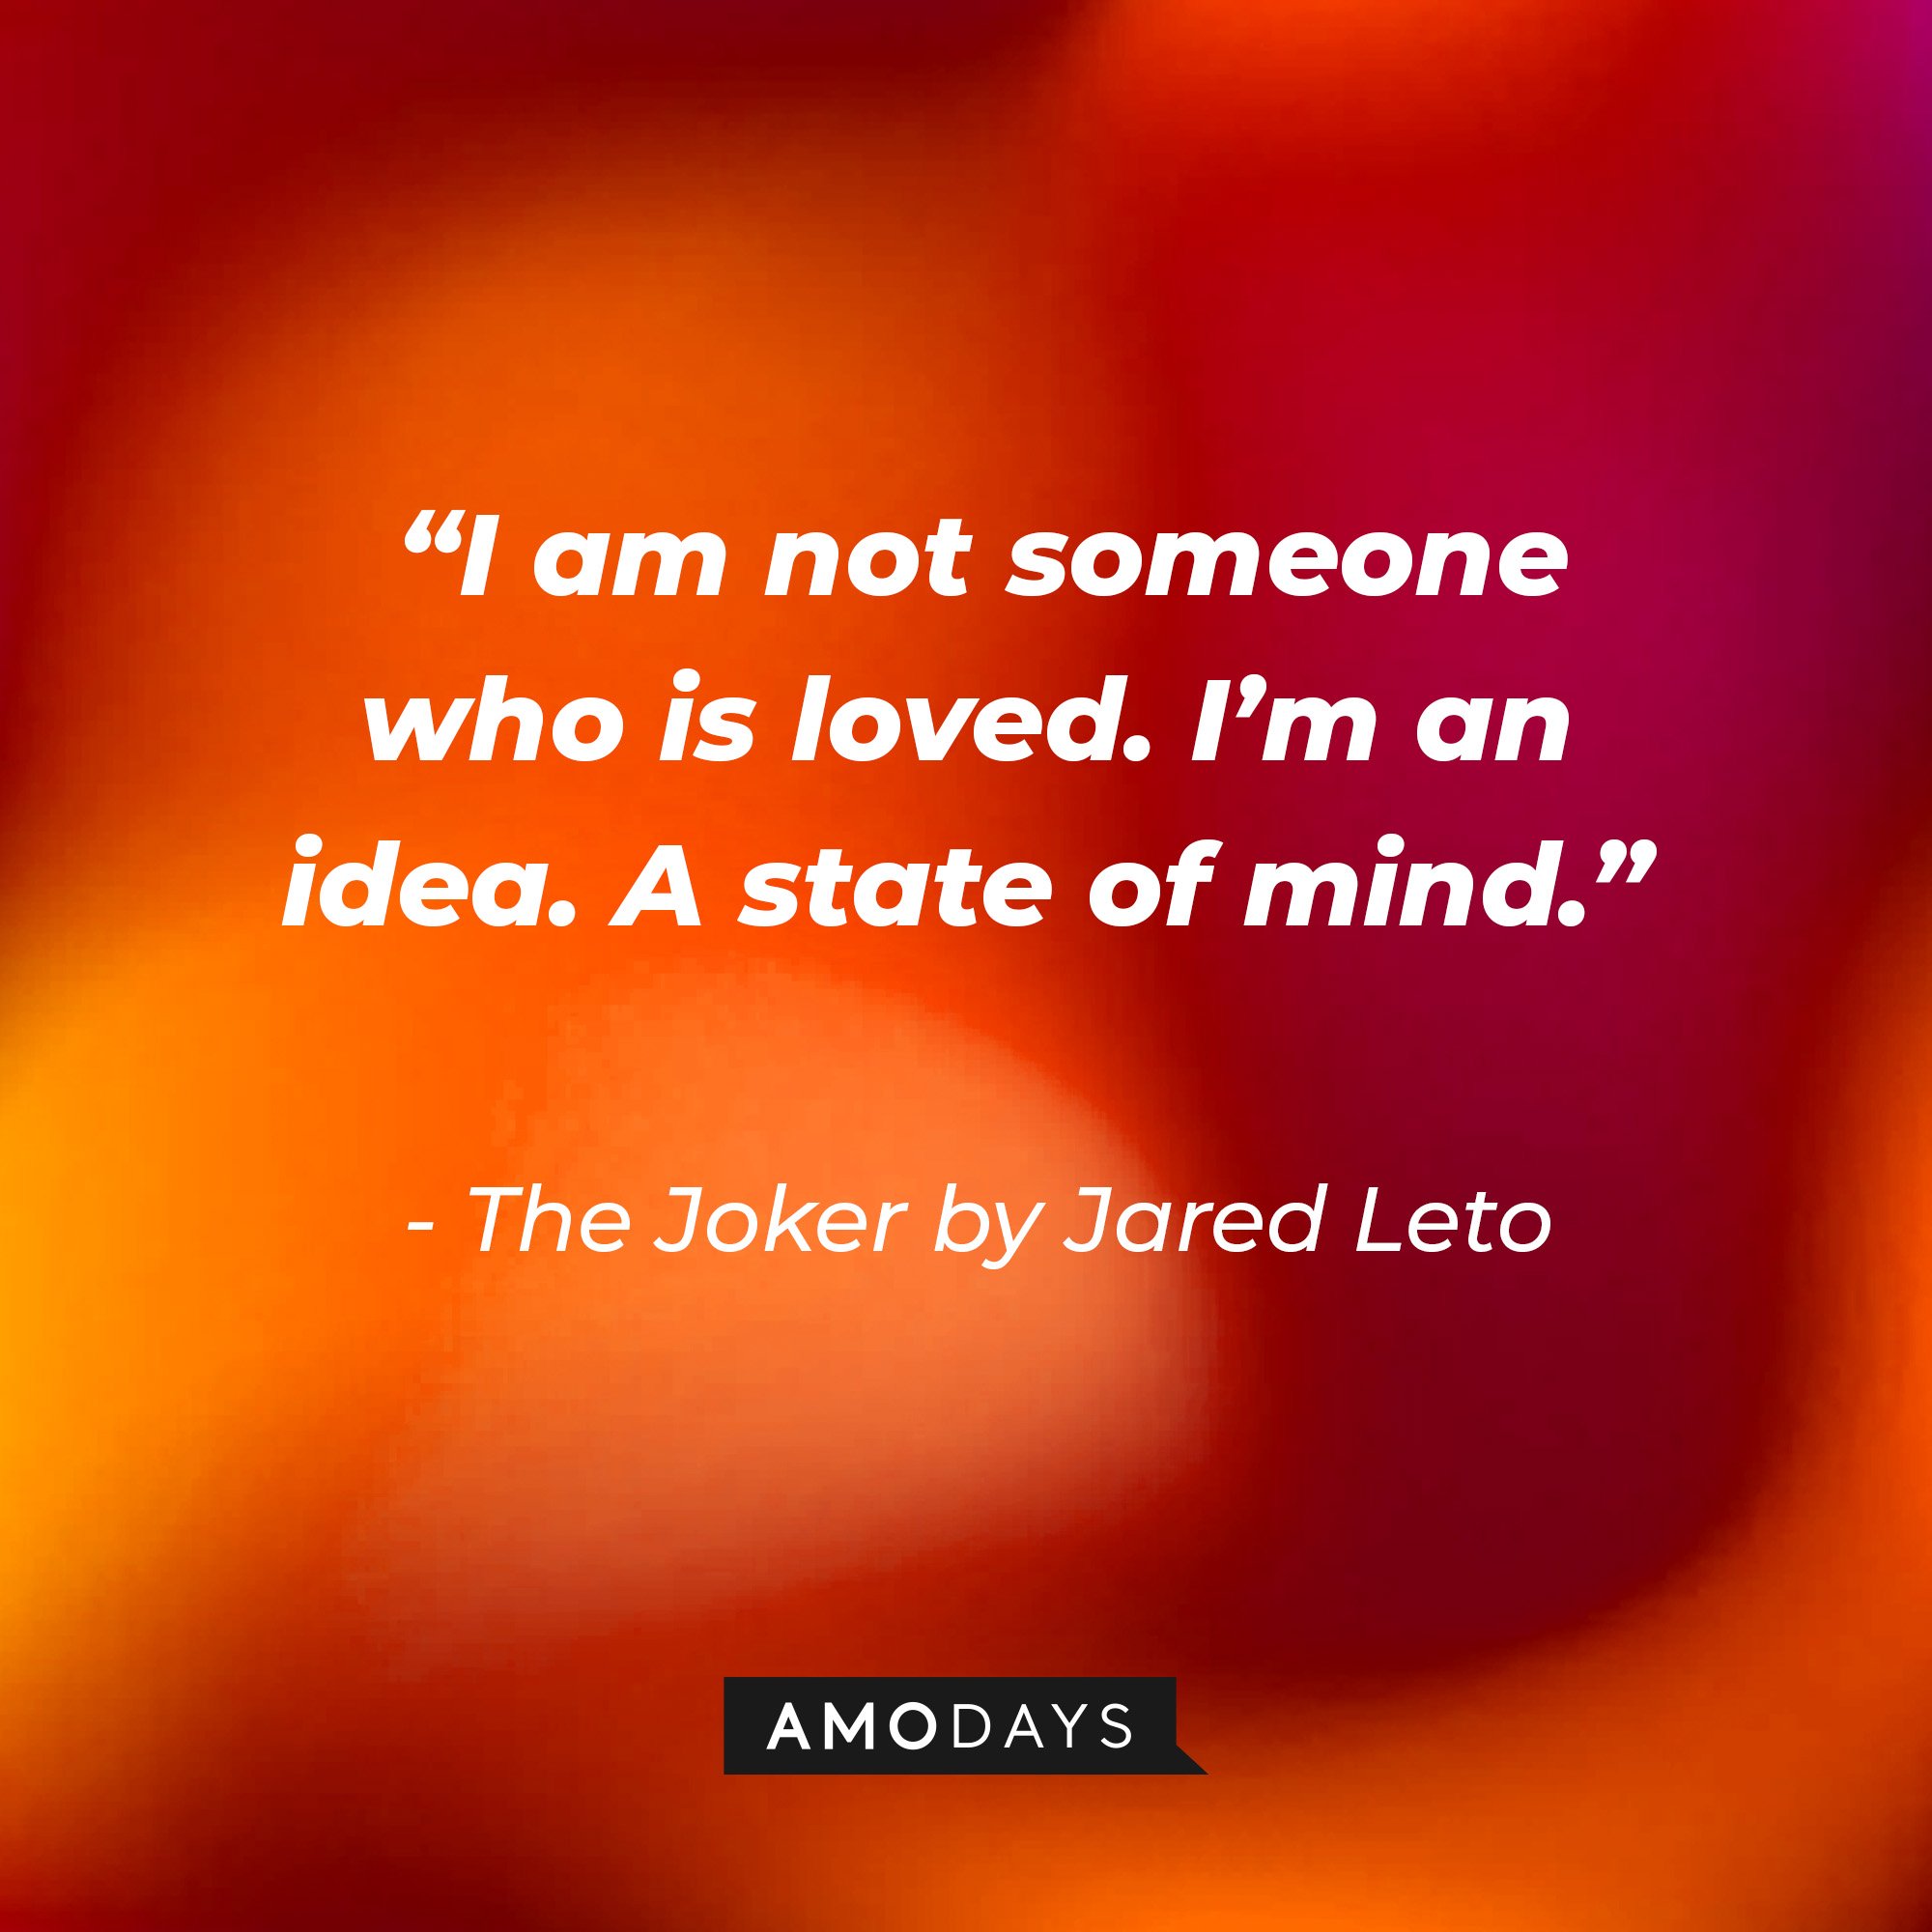 The Joker in David Ayer’s “Suicide Squad” quote: “I am not someone who is loved. I’m an idea. A state of mind.” | Image: Amodays